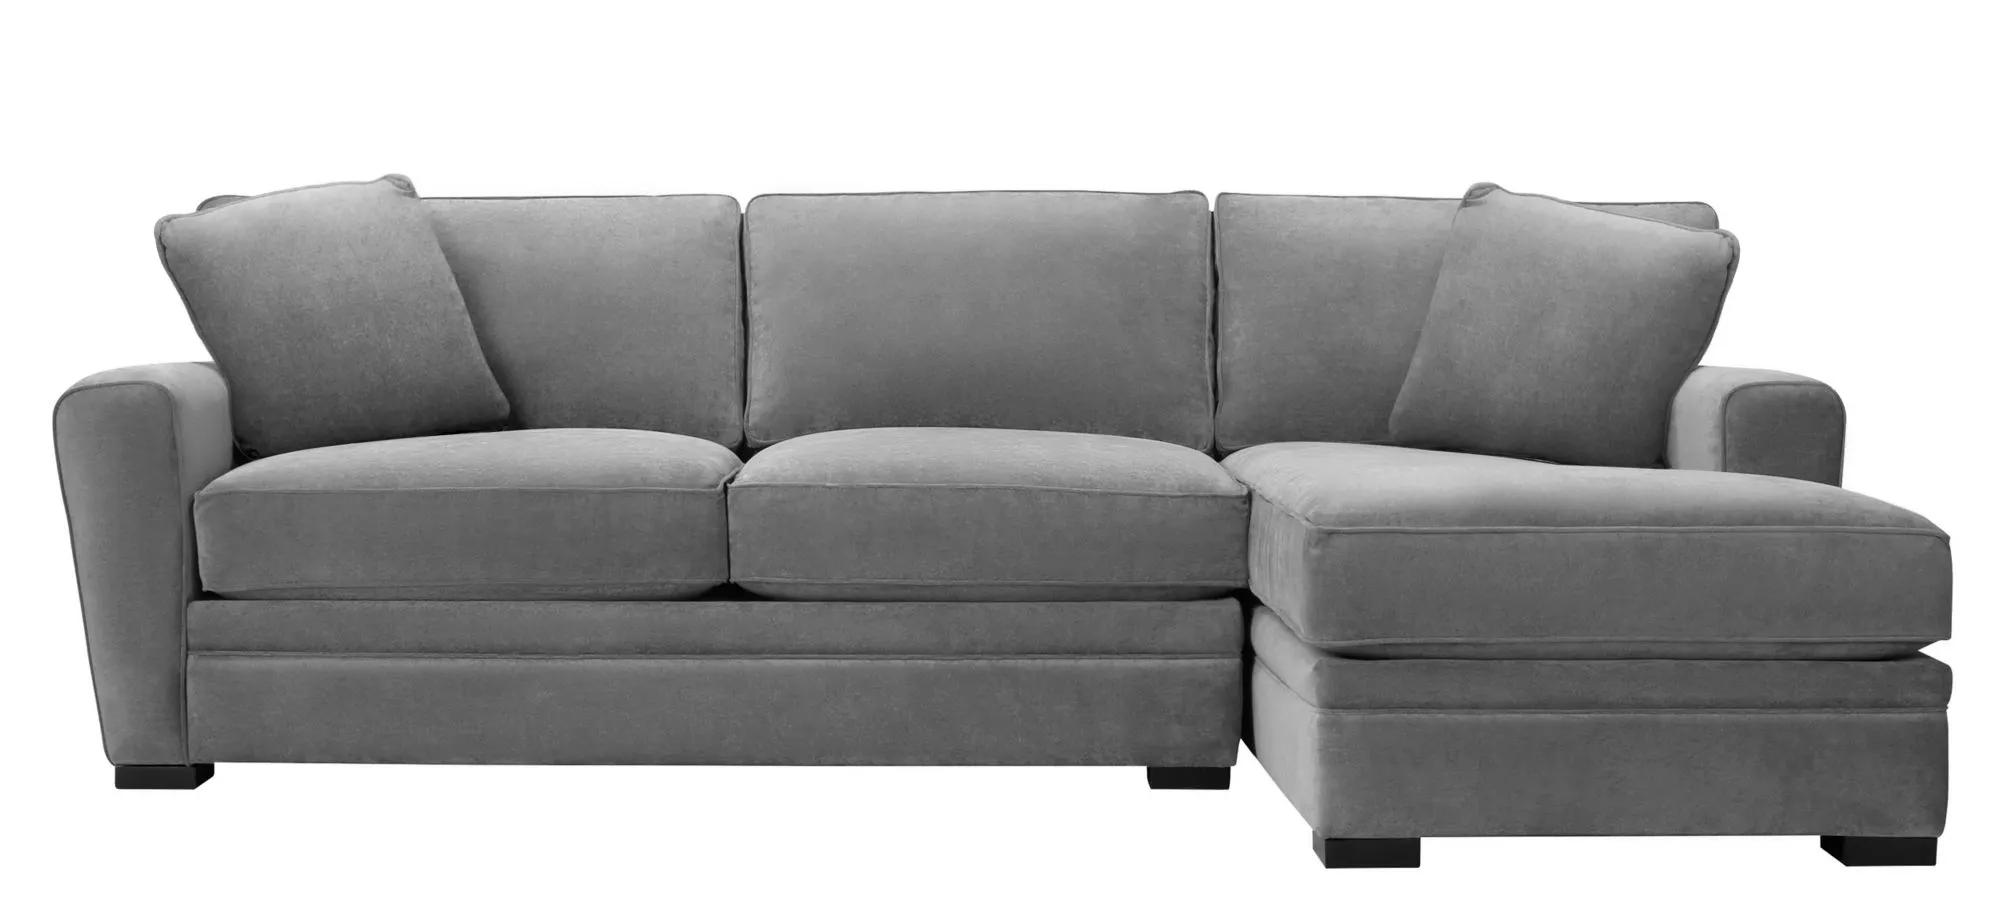 Artemis II 2-pc. Right Hand Facing Sectional Sofa in Gypsy Smoked Pearl by Jonathan Louis